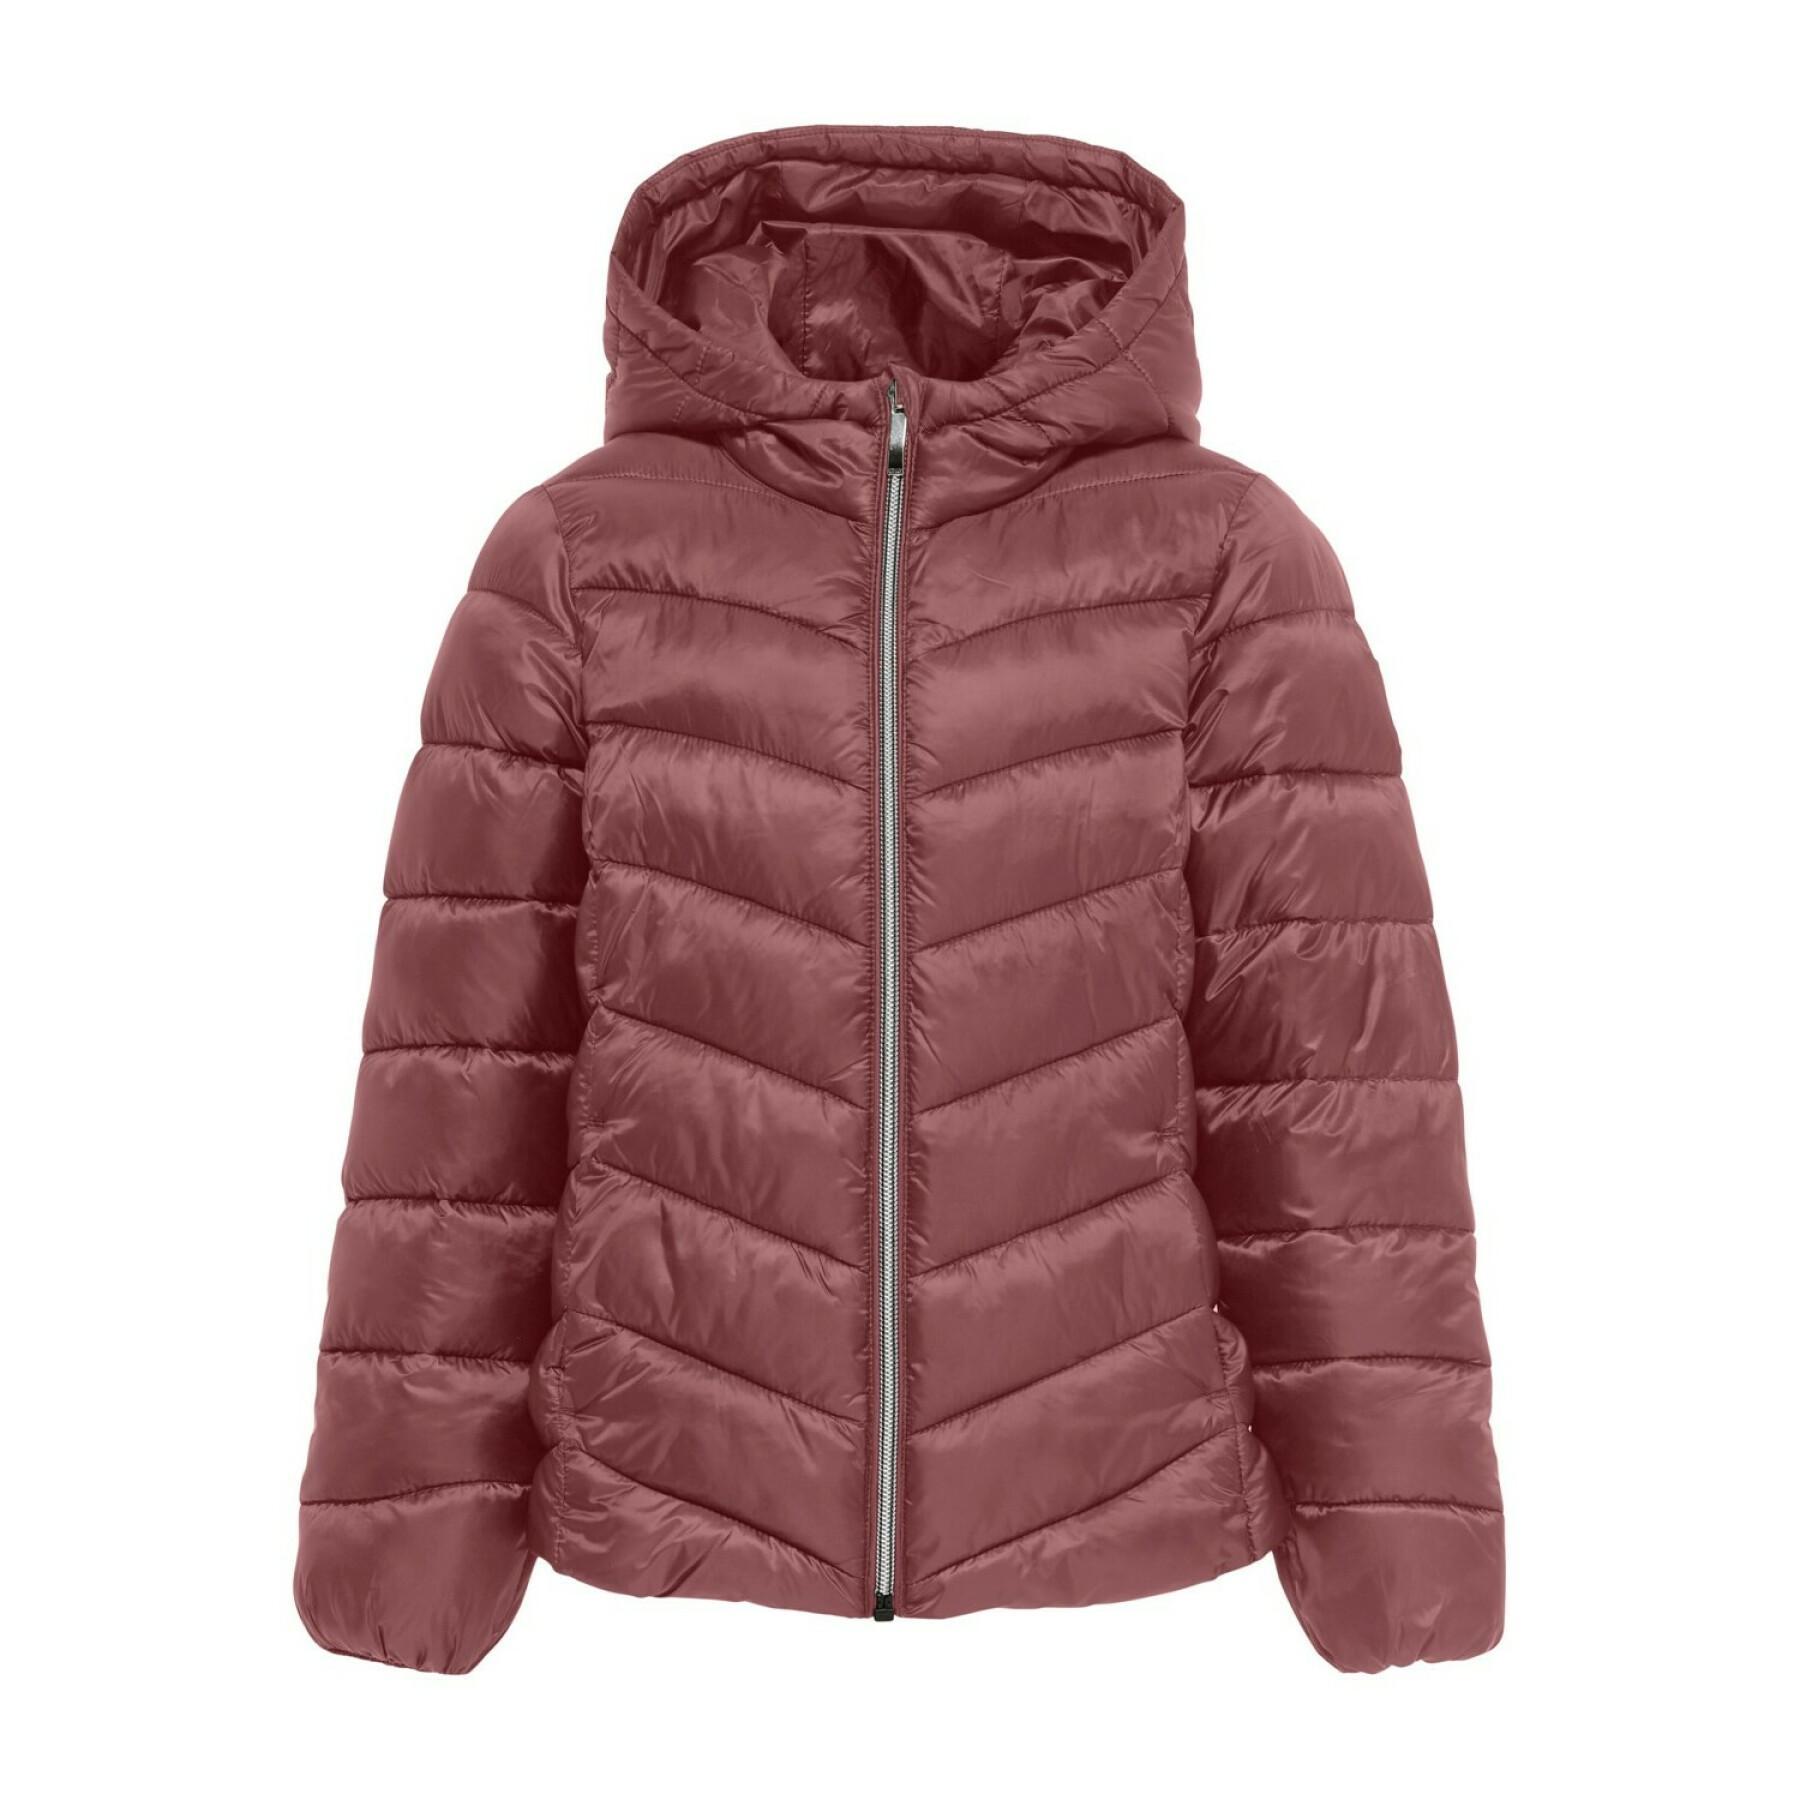 Girl's jacket Only kids kontanea quilted